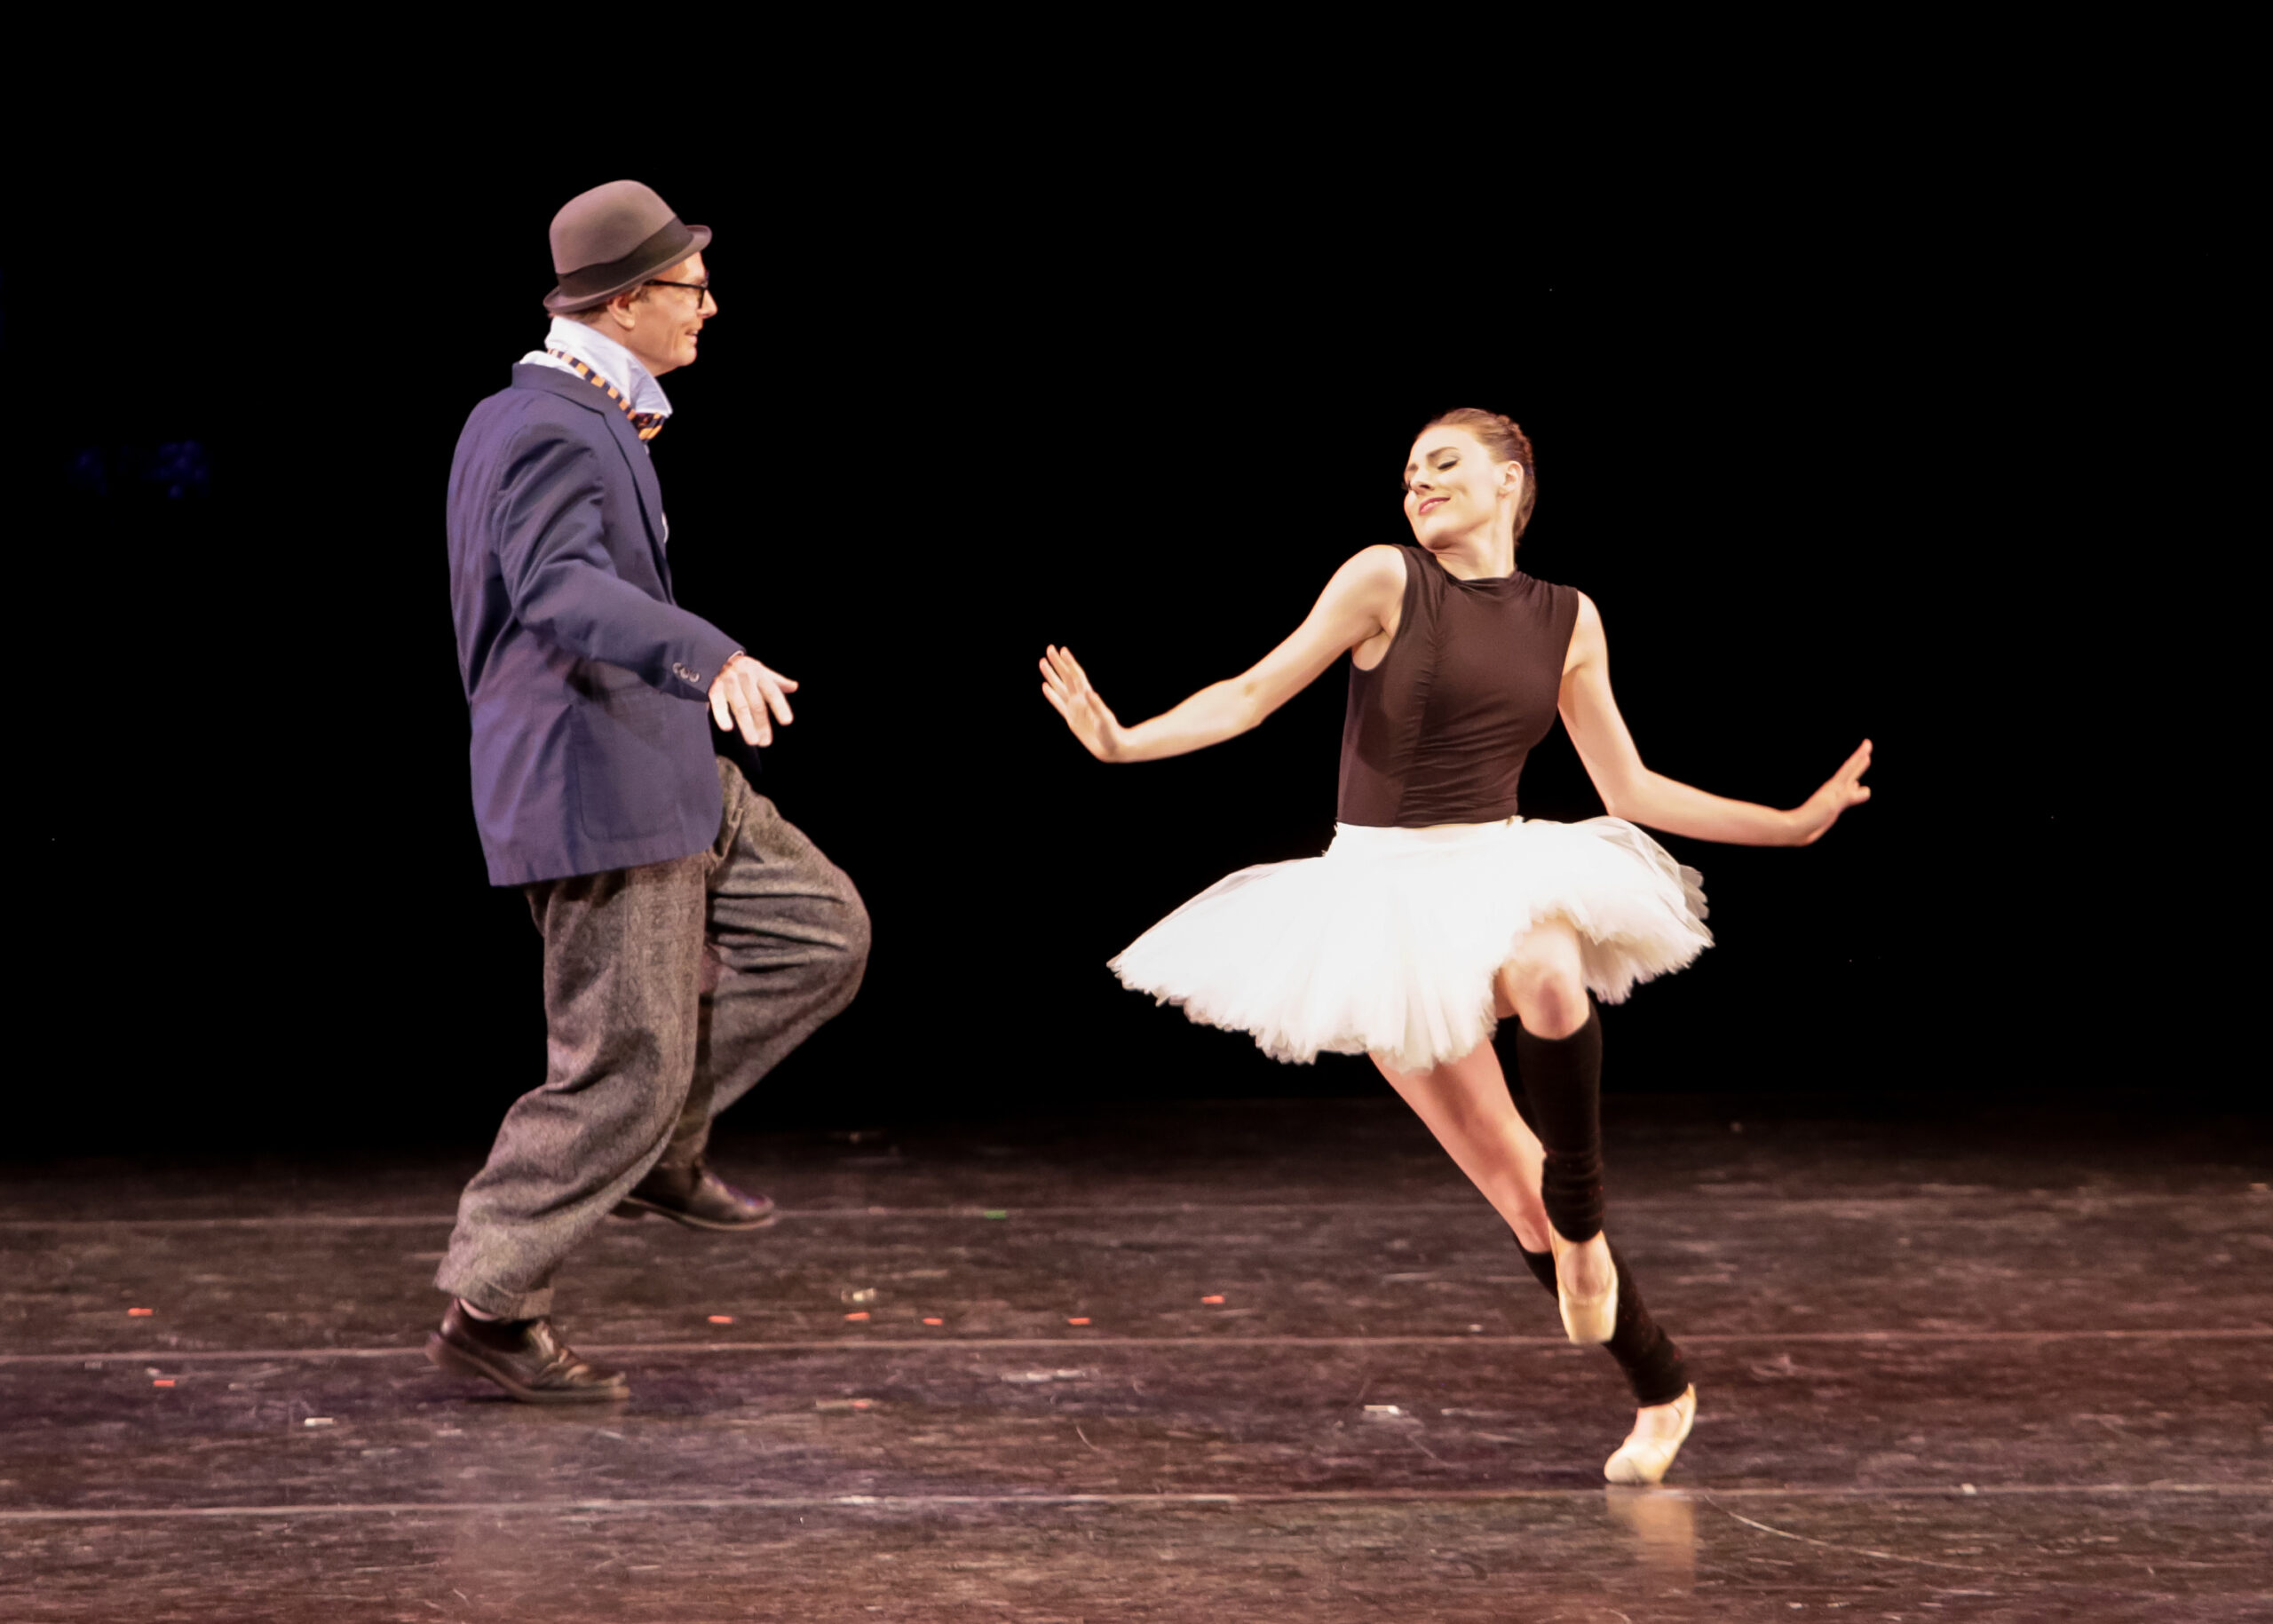 Bill Irwin is caught in profile, his knees bent and one foot rising from the floor, hands lightly extended to the side as though for balance. Slightly downstage, Tiler Peck prances through a similar movement, shoulders shrugged and a delighted smile on her face.